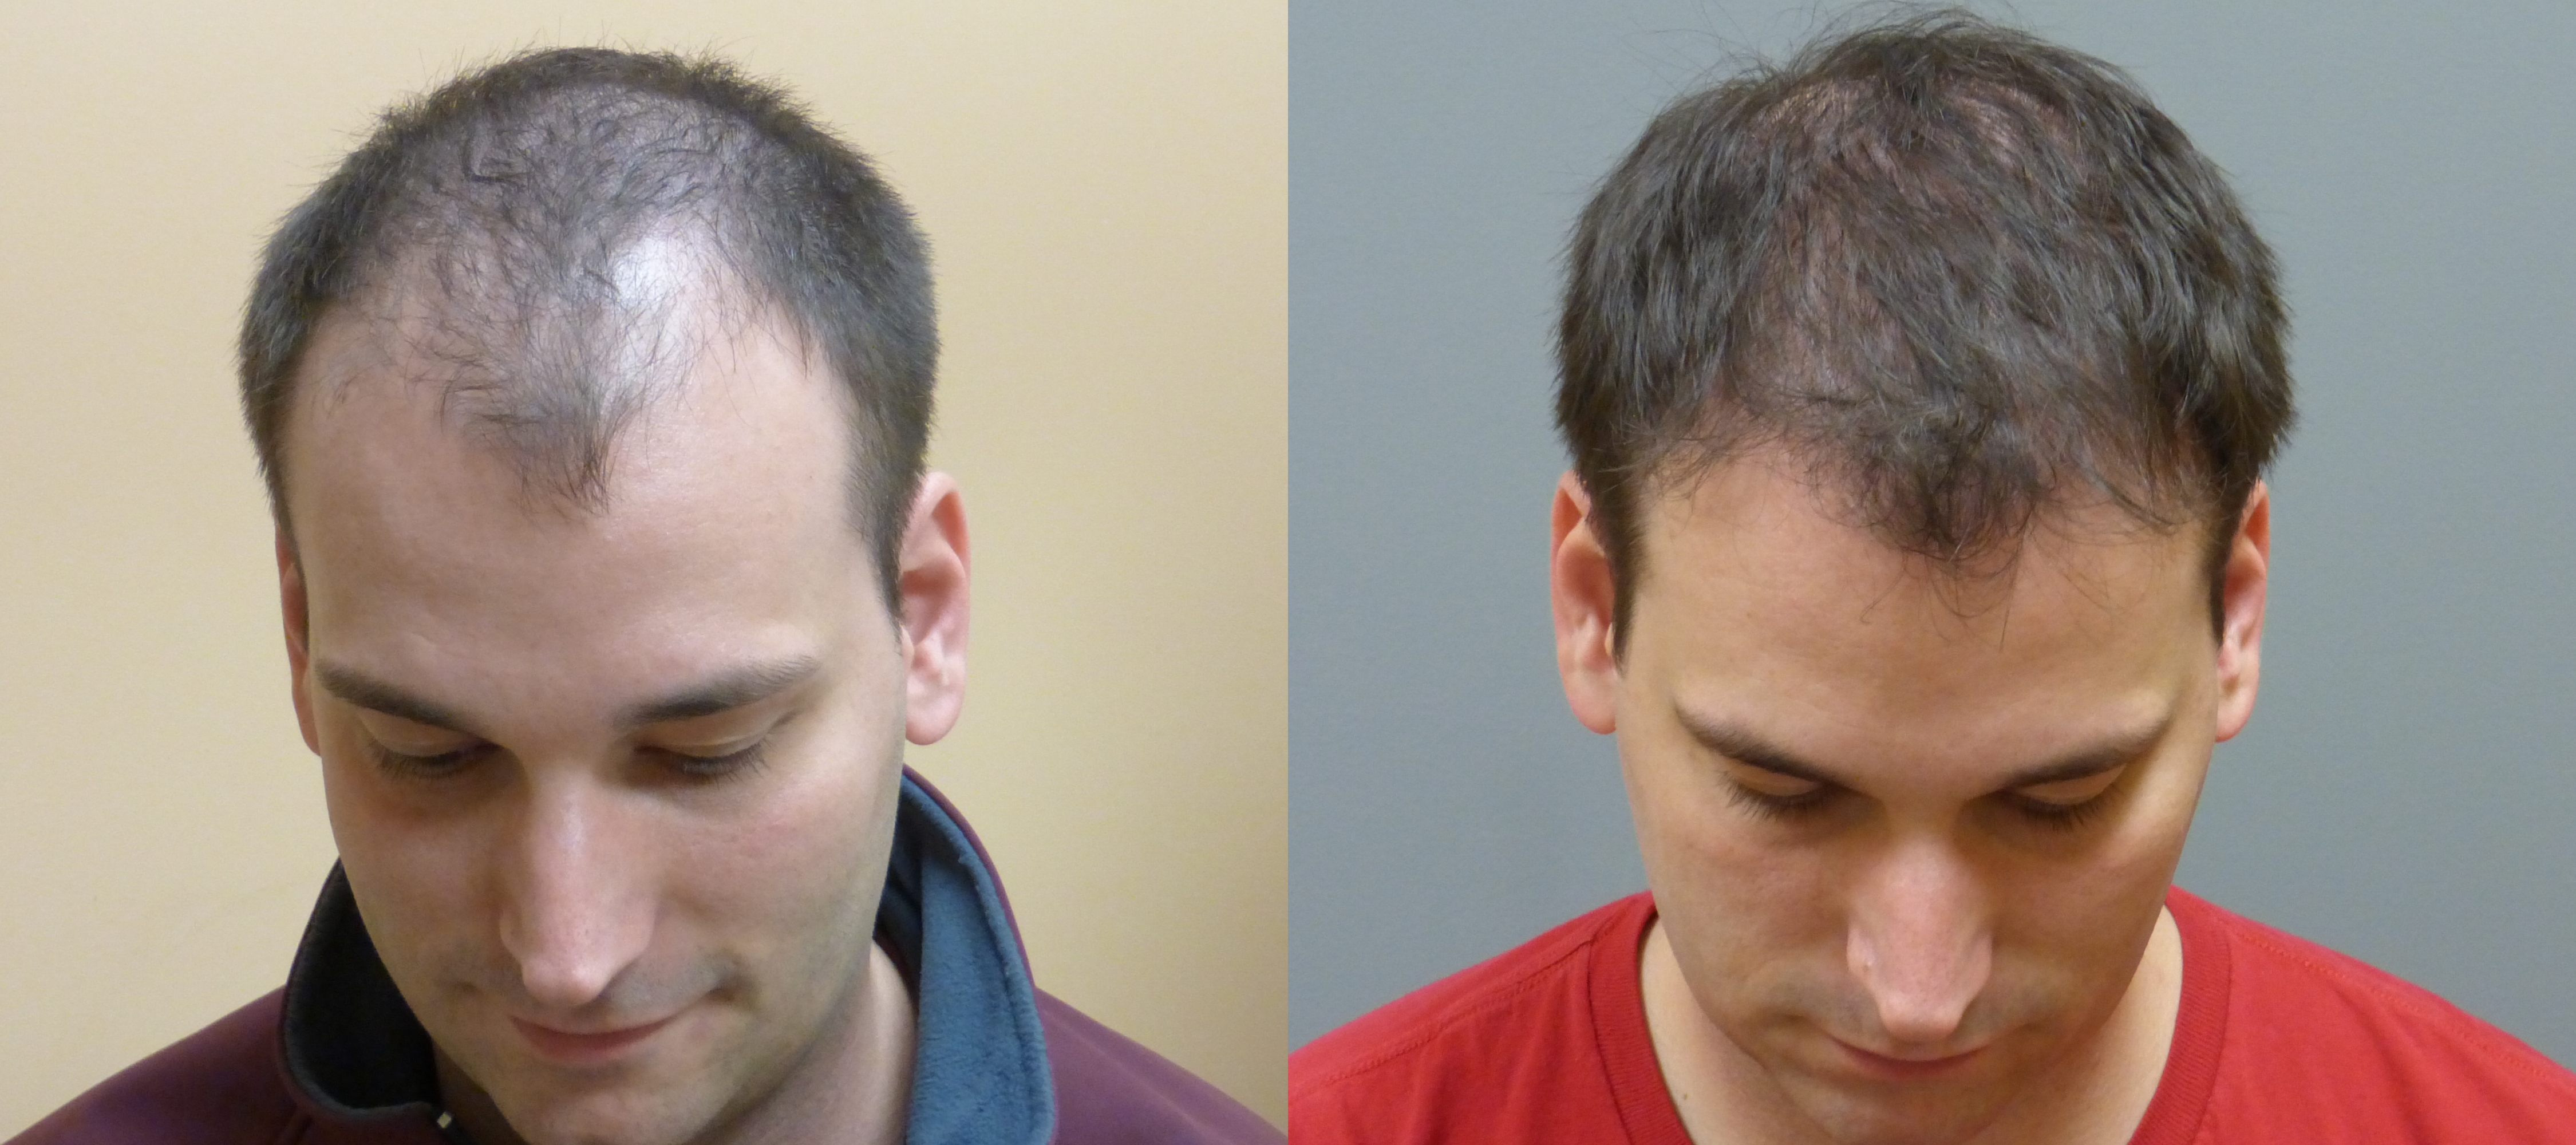 Before and 7 months after Neograft Hair Transplantation in Savannah. Photo copyrights Dr. E. Ronald  Hair Restoration Savannah Savannah (912)480-9913